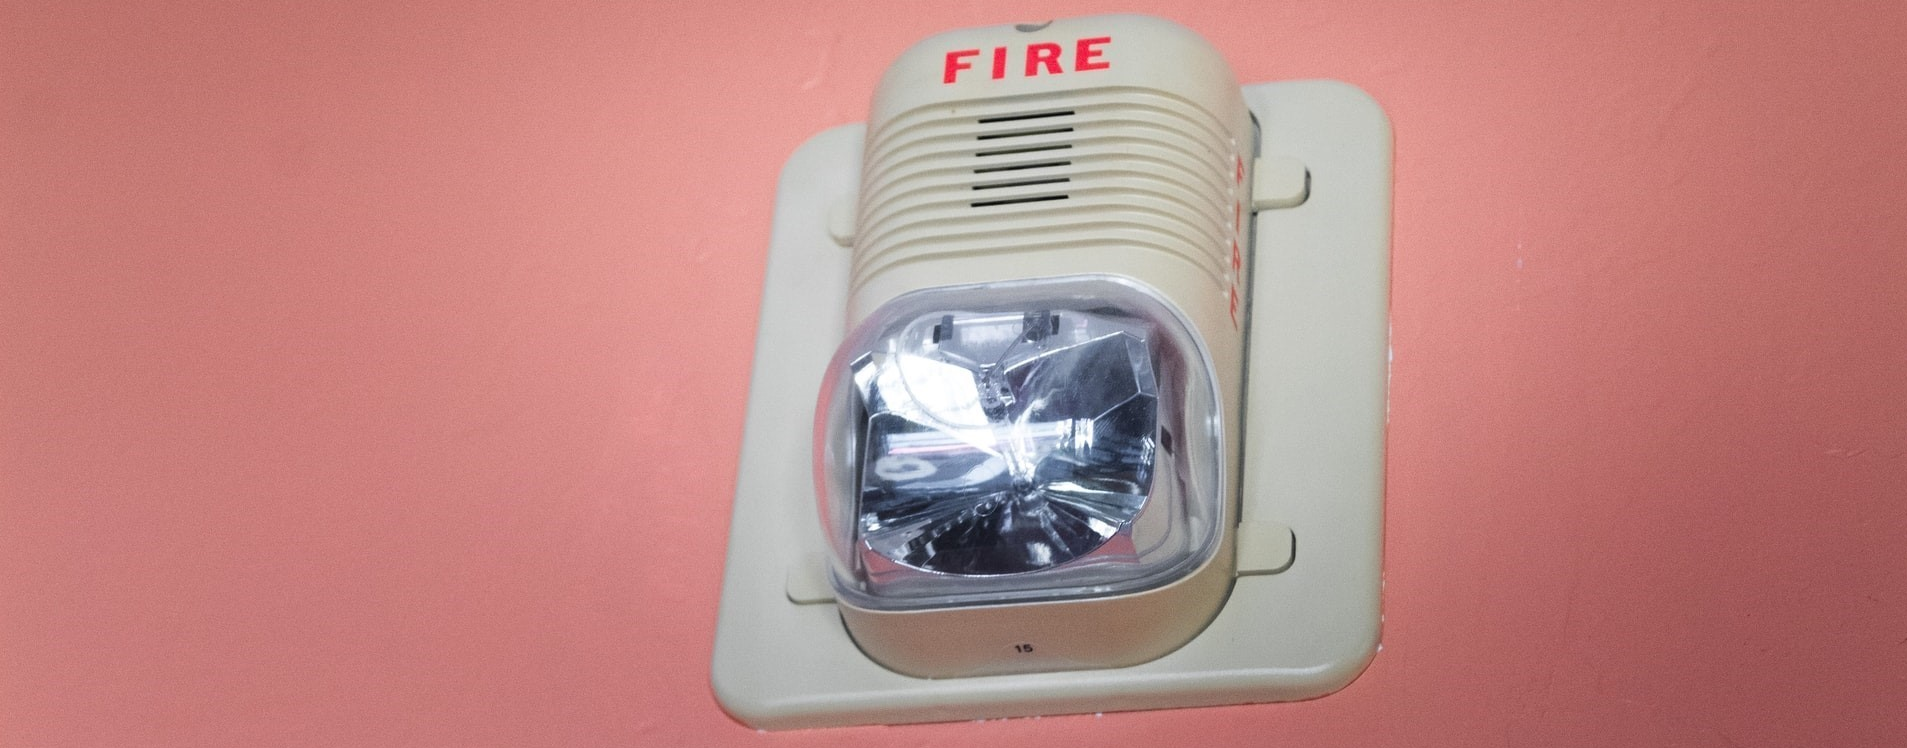 Picture of a fire alarm